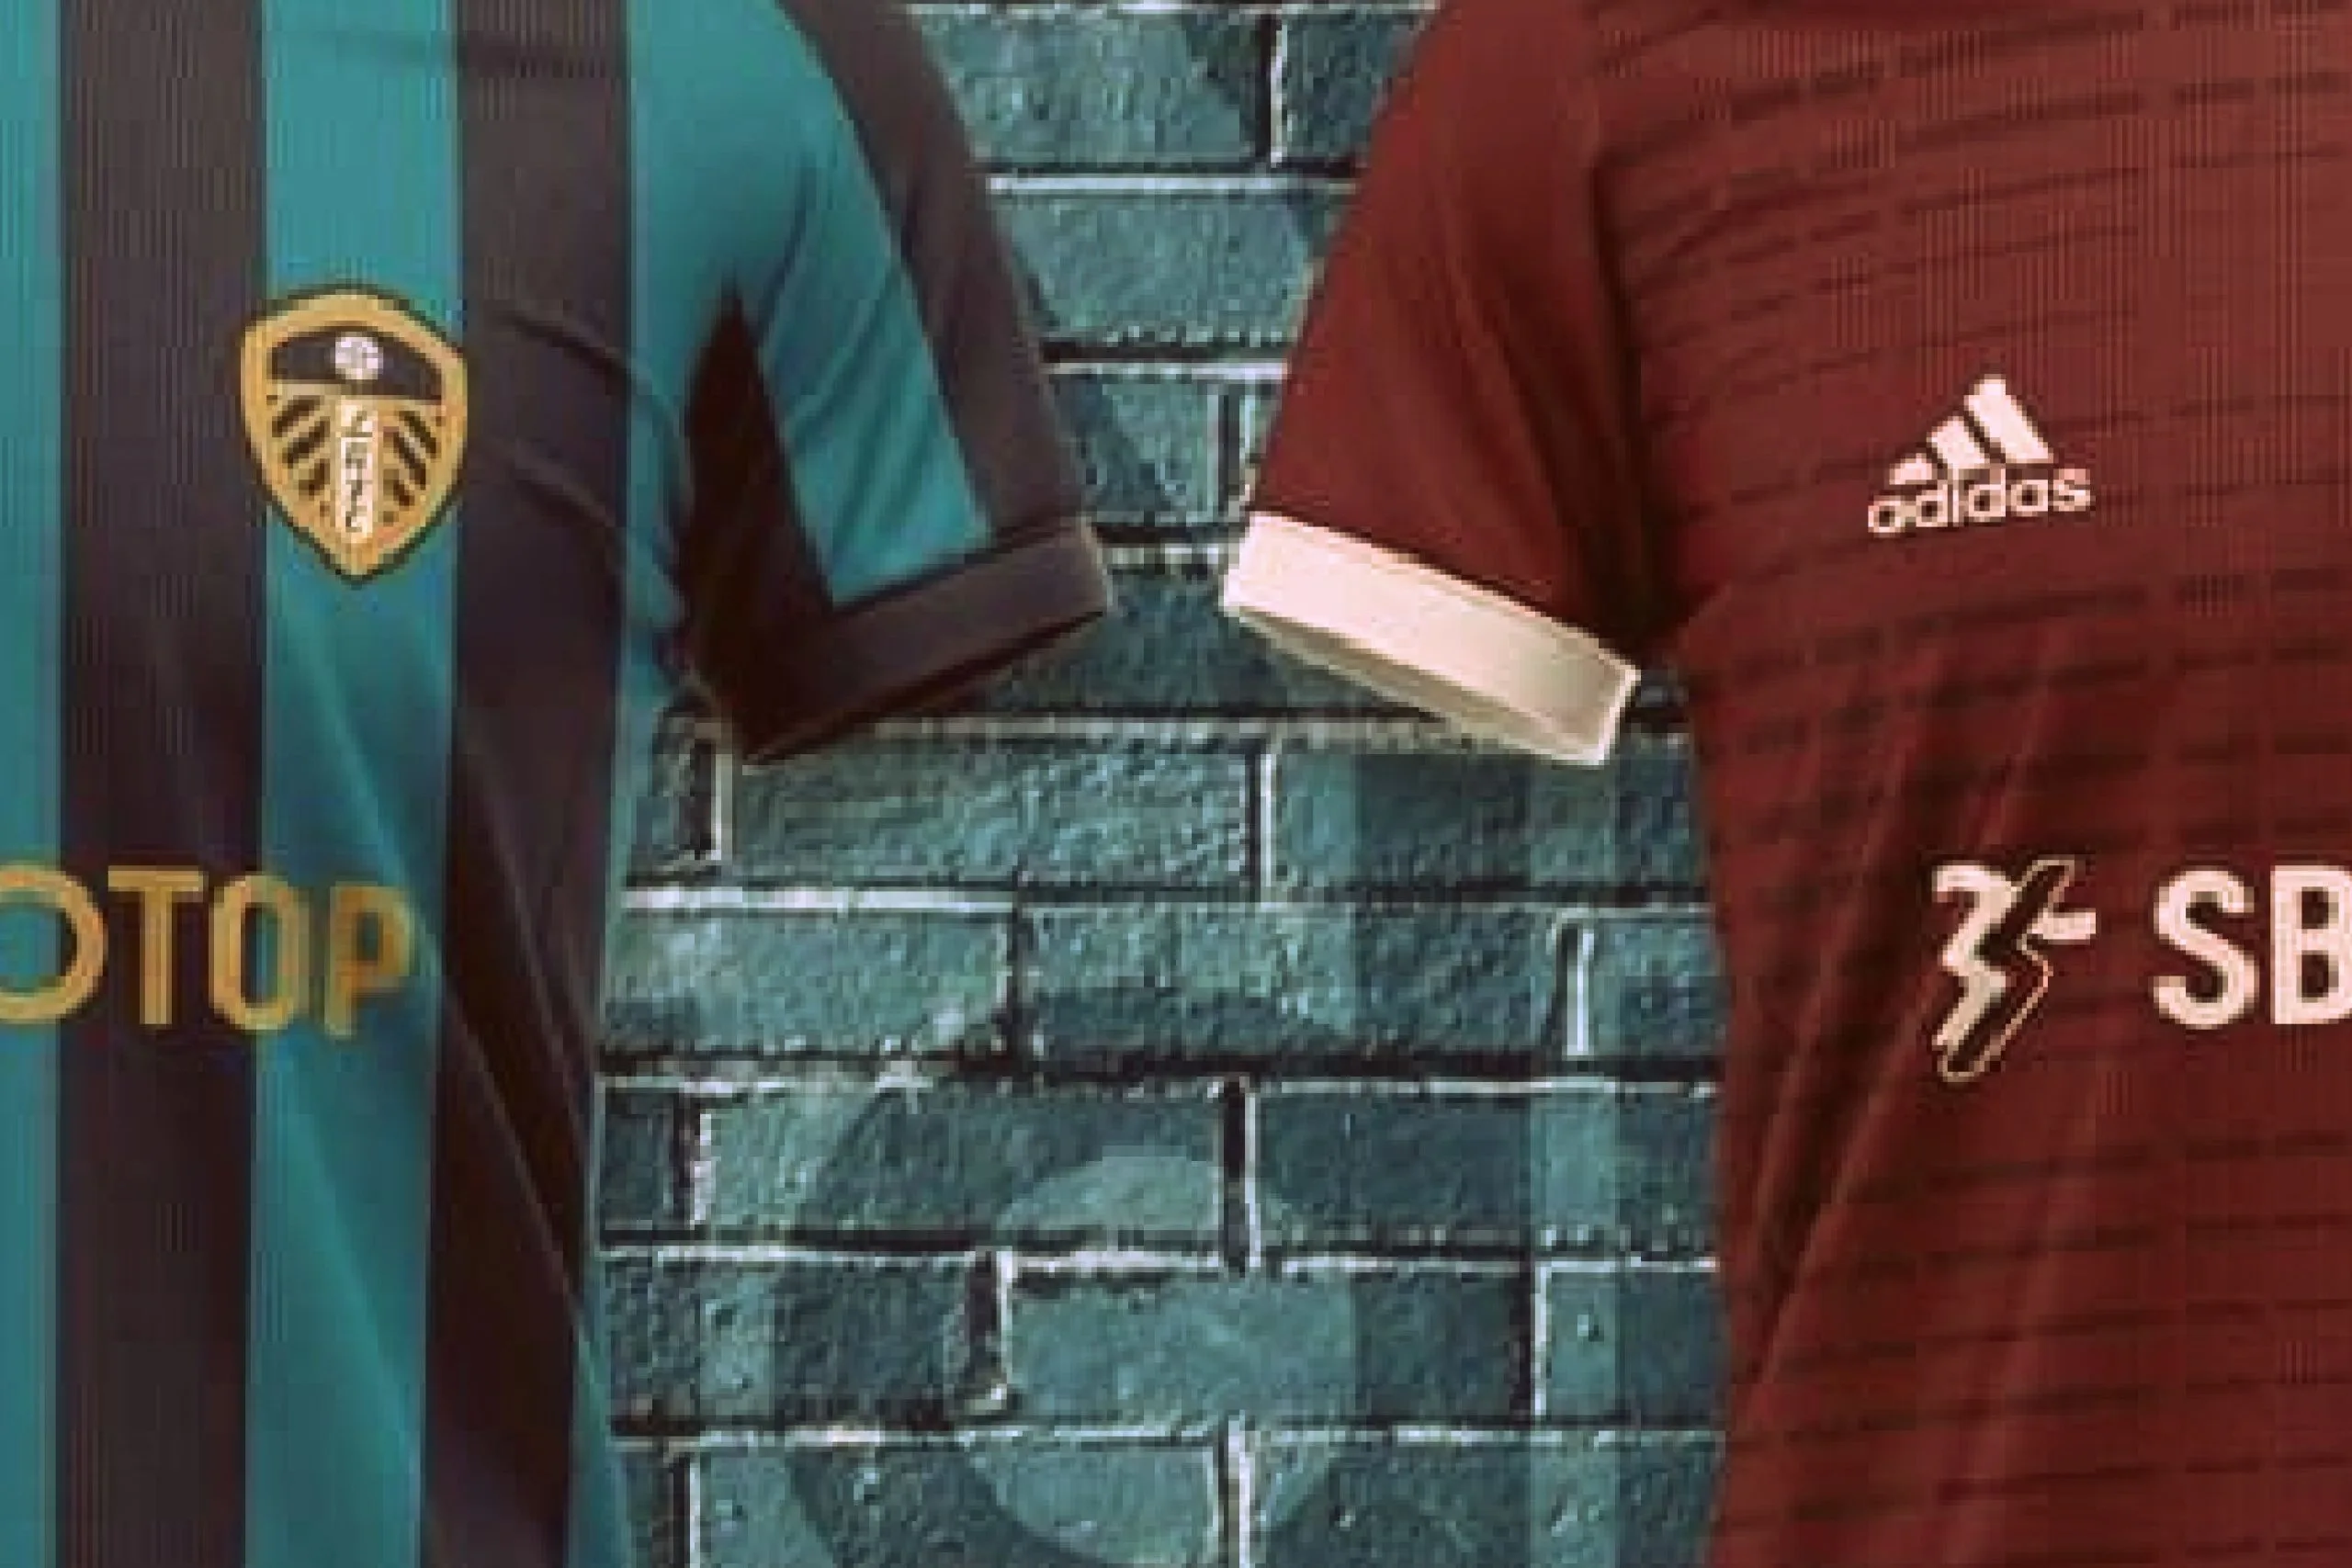 New leaks of Leeds United's away and possible third kit for 20_21 season from Adidas arrive online